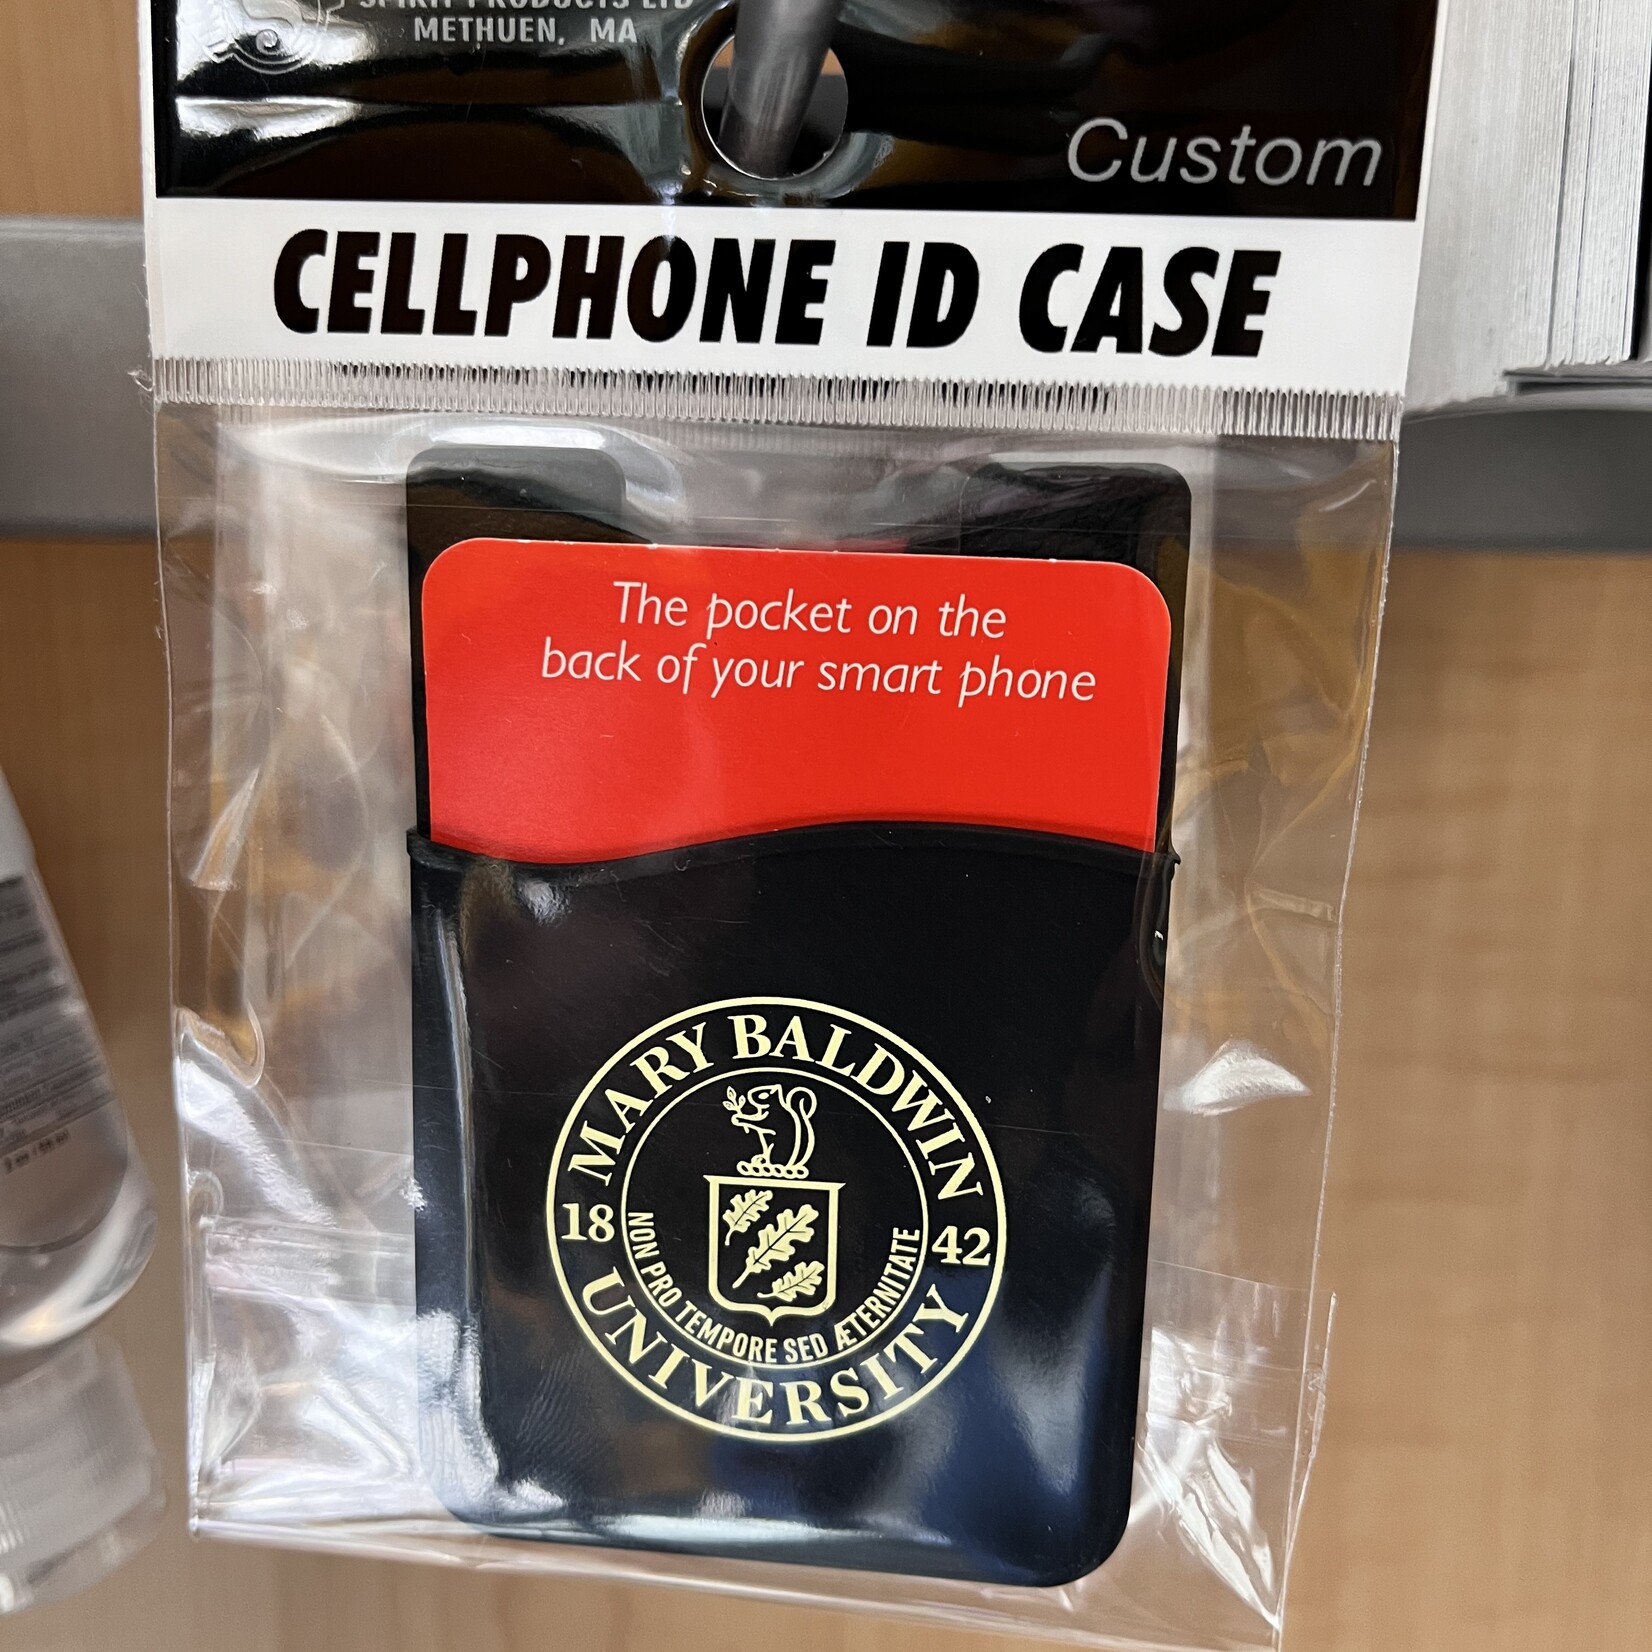 Spirit Products Cellphone ID Case - Black with Crest